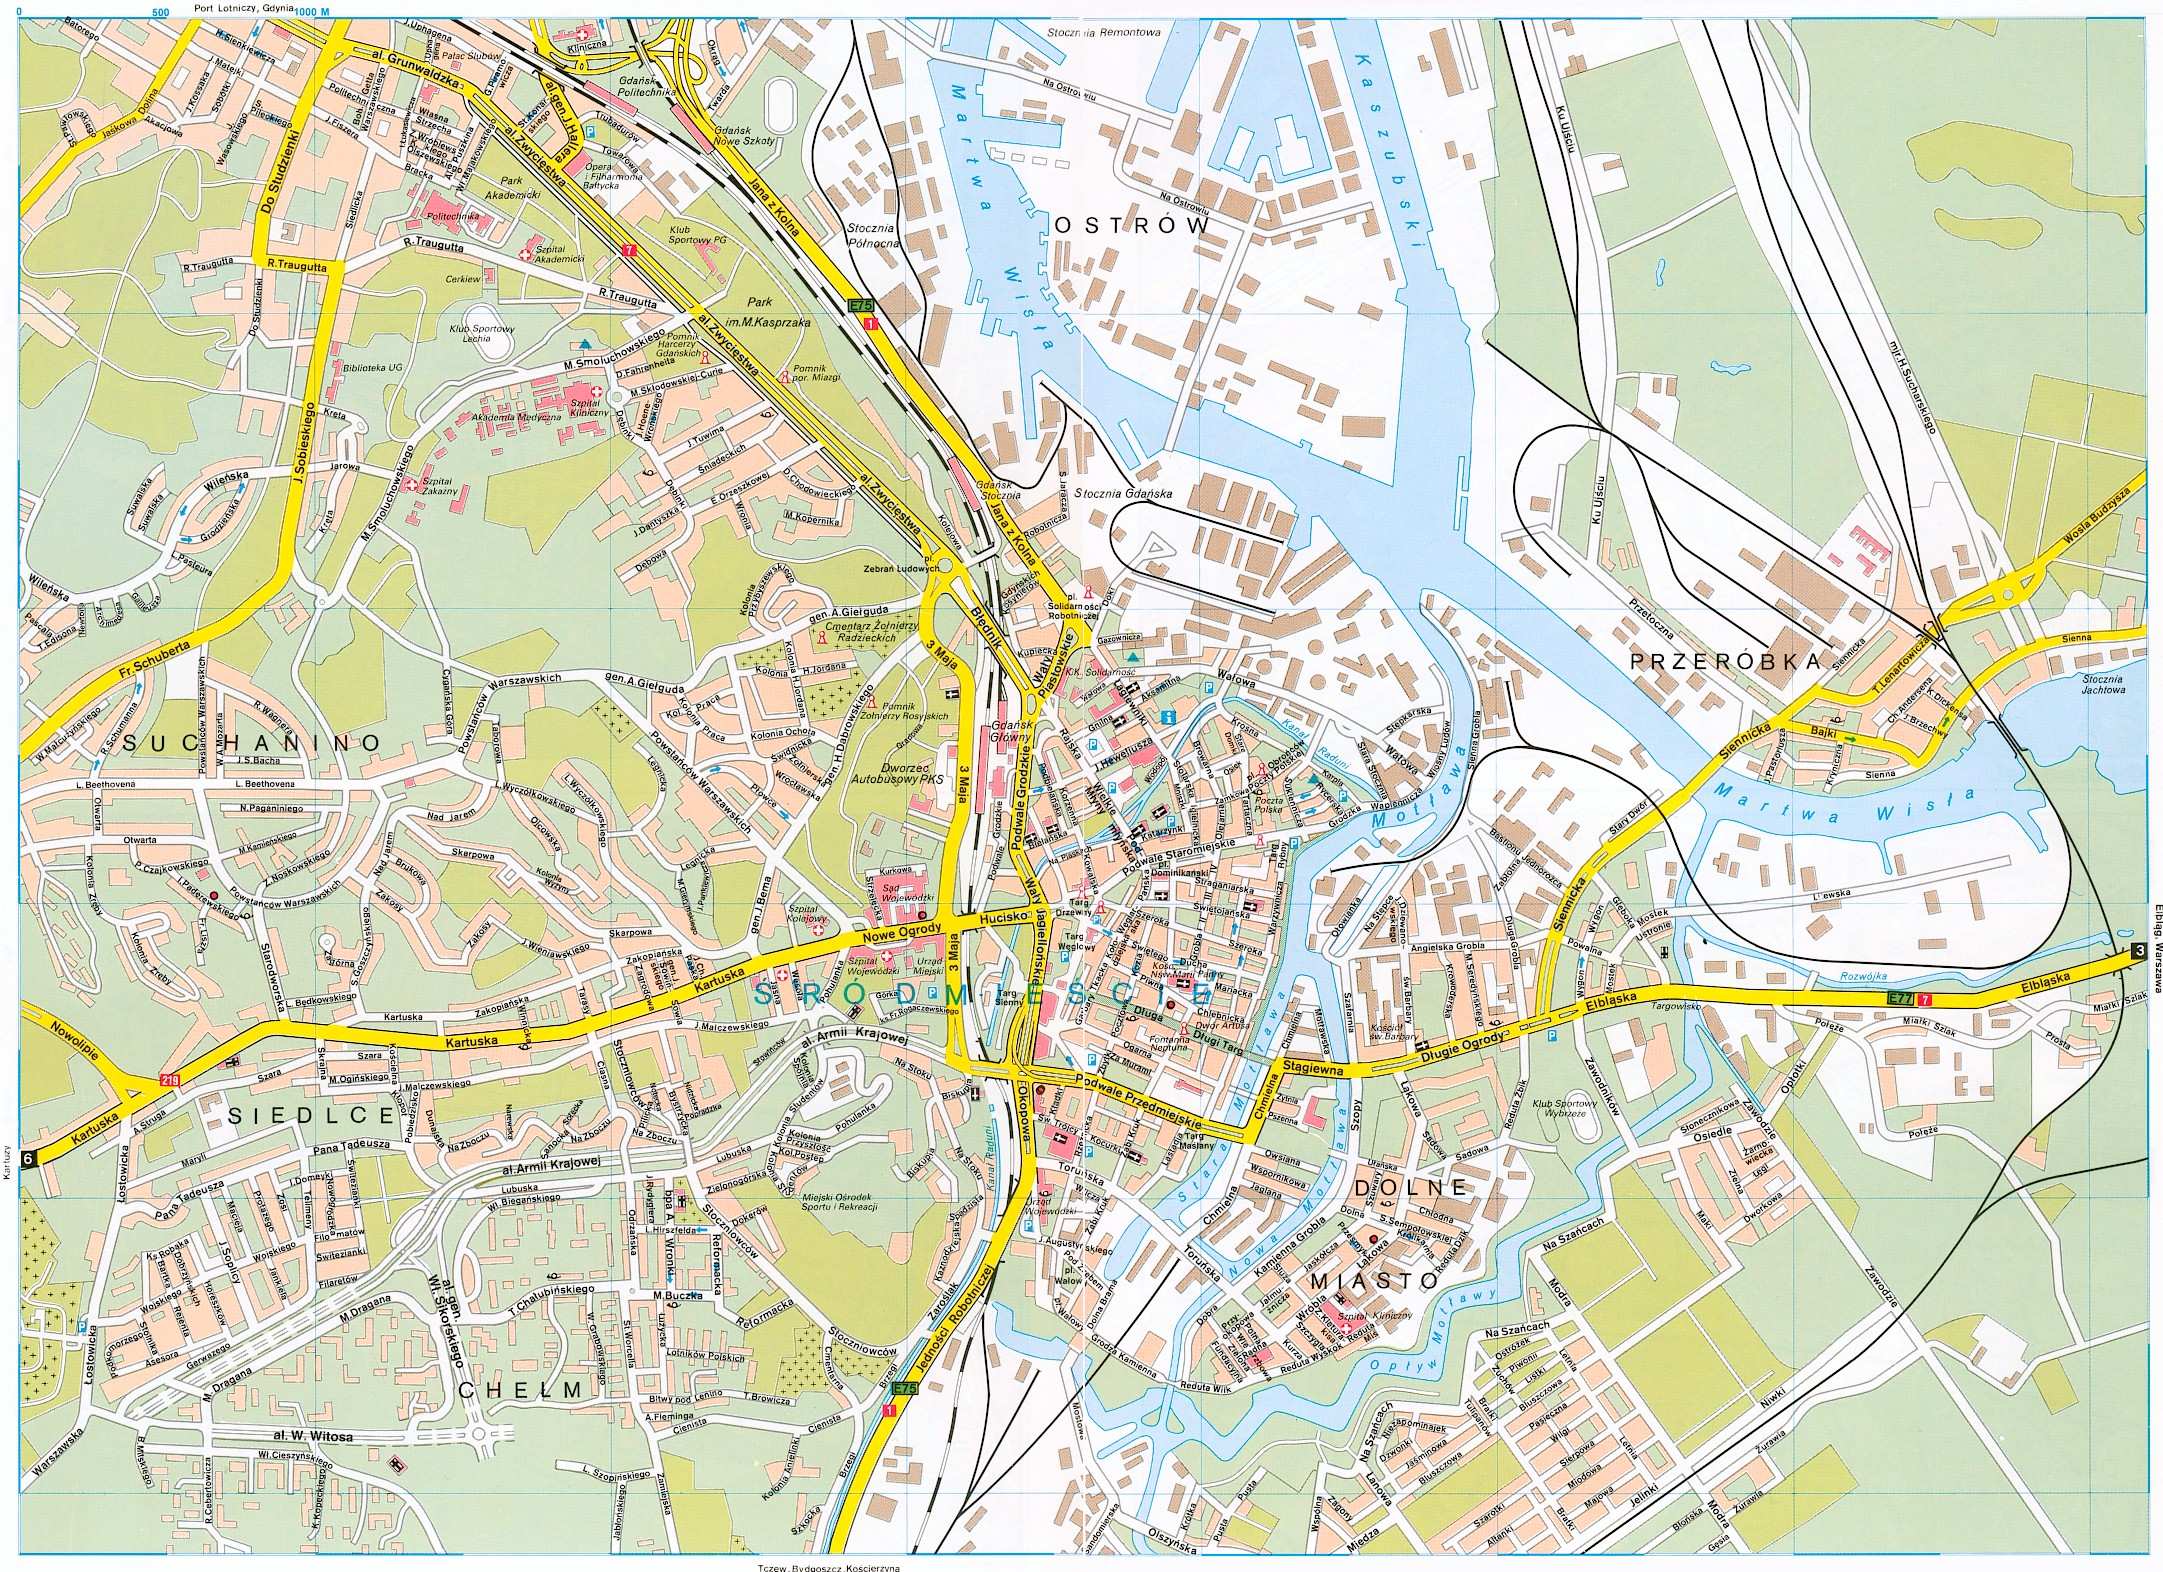 gdansk map with tourist attraction